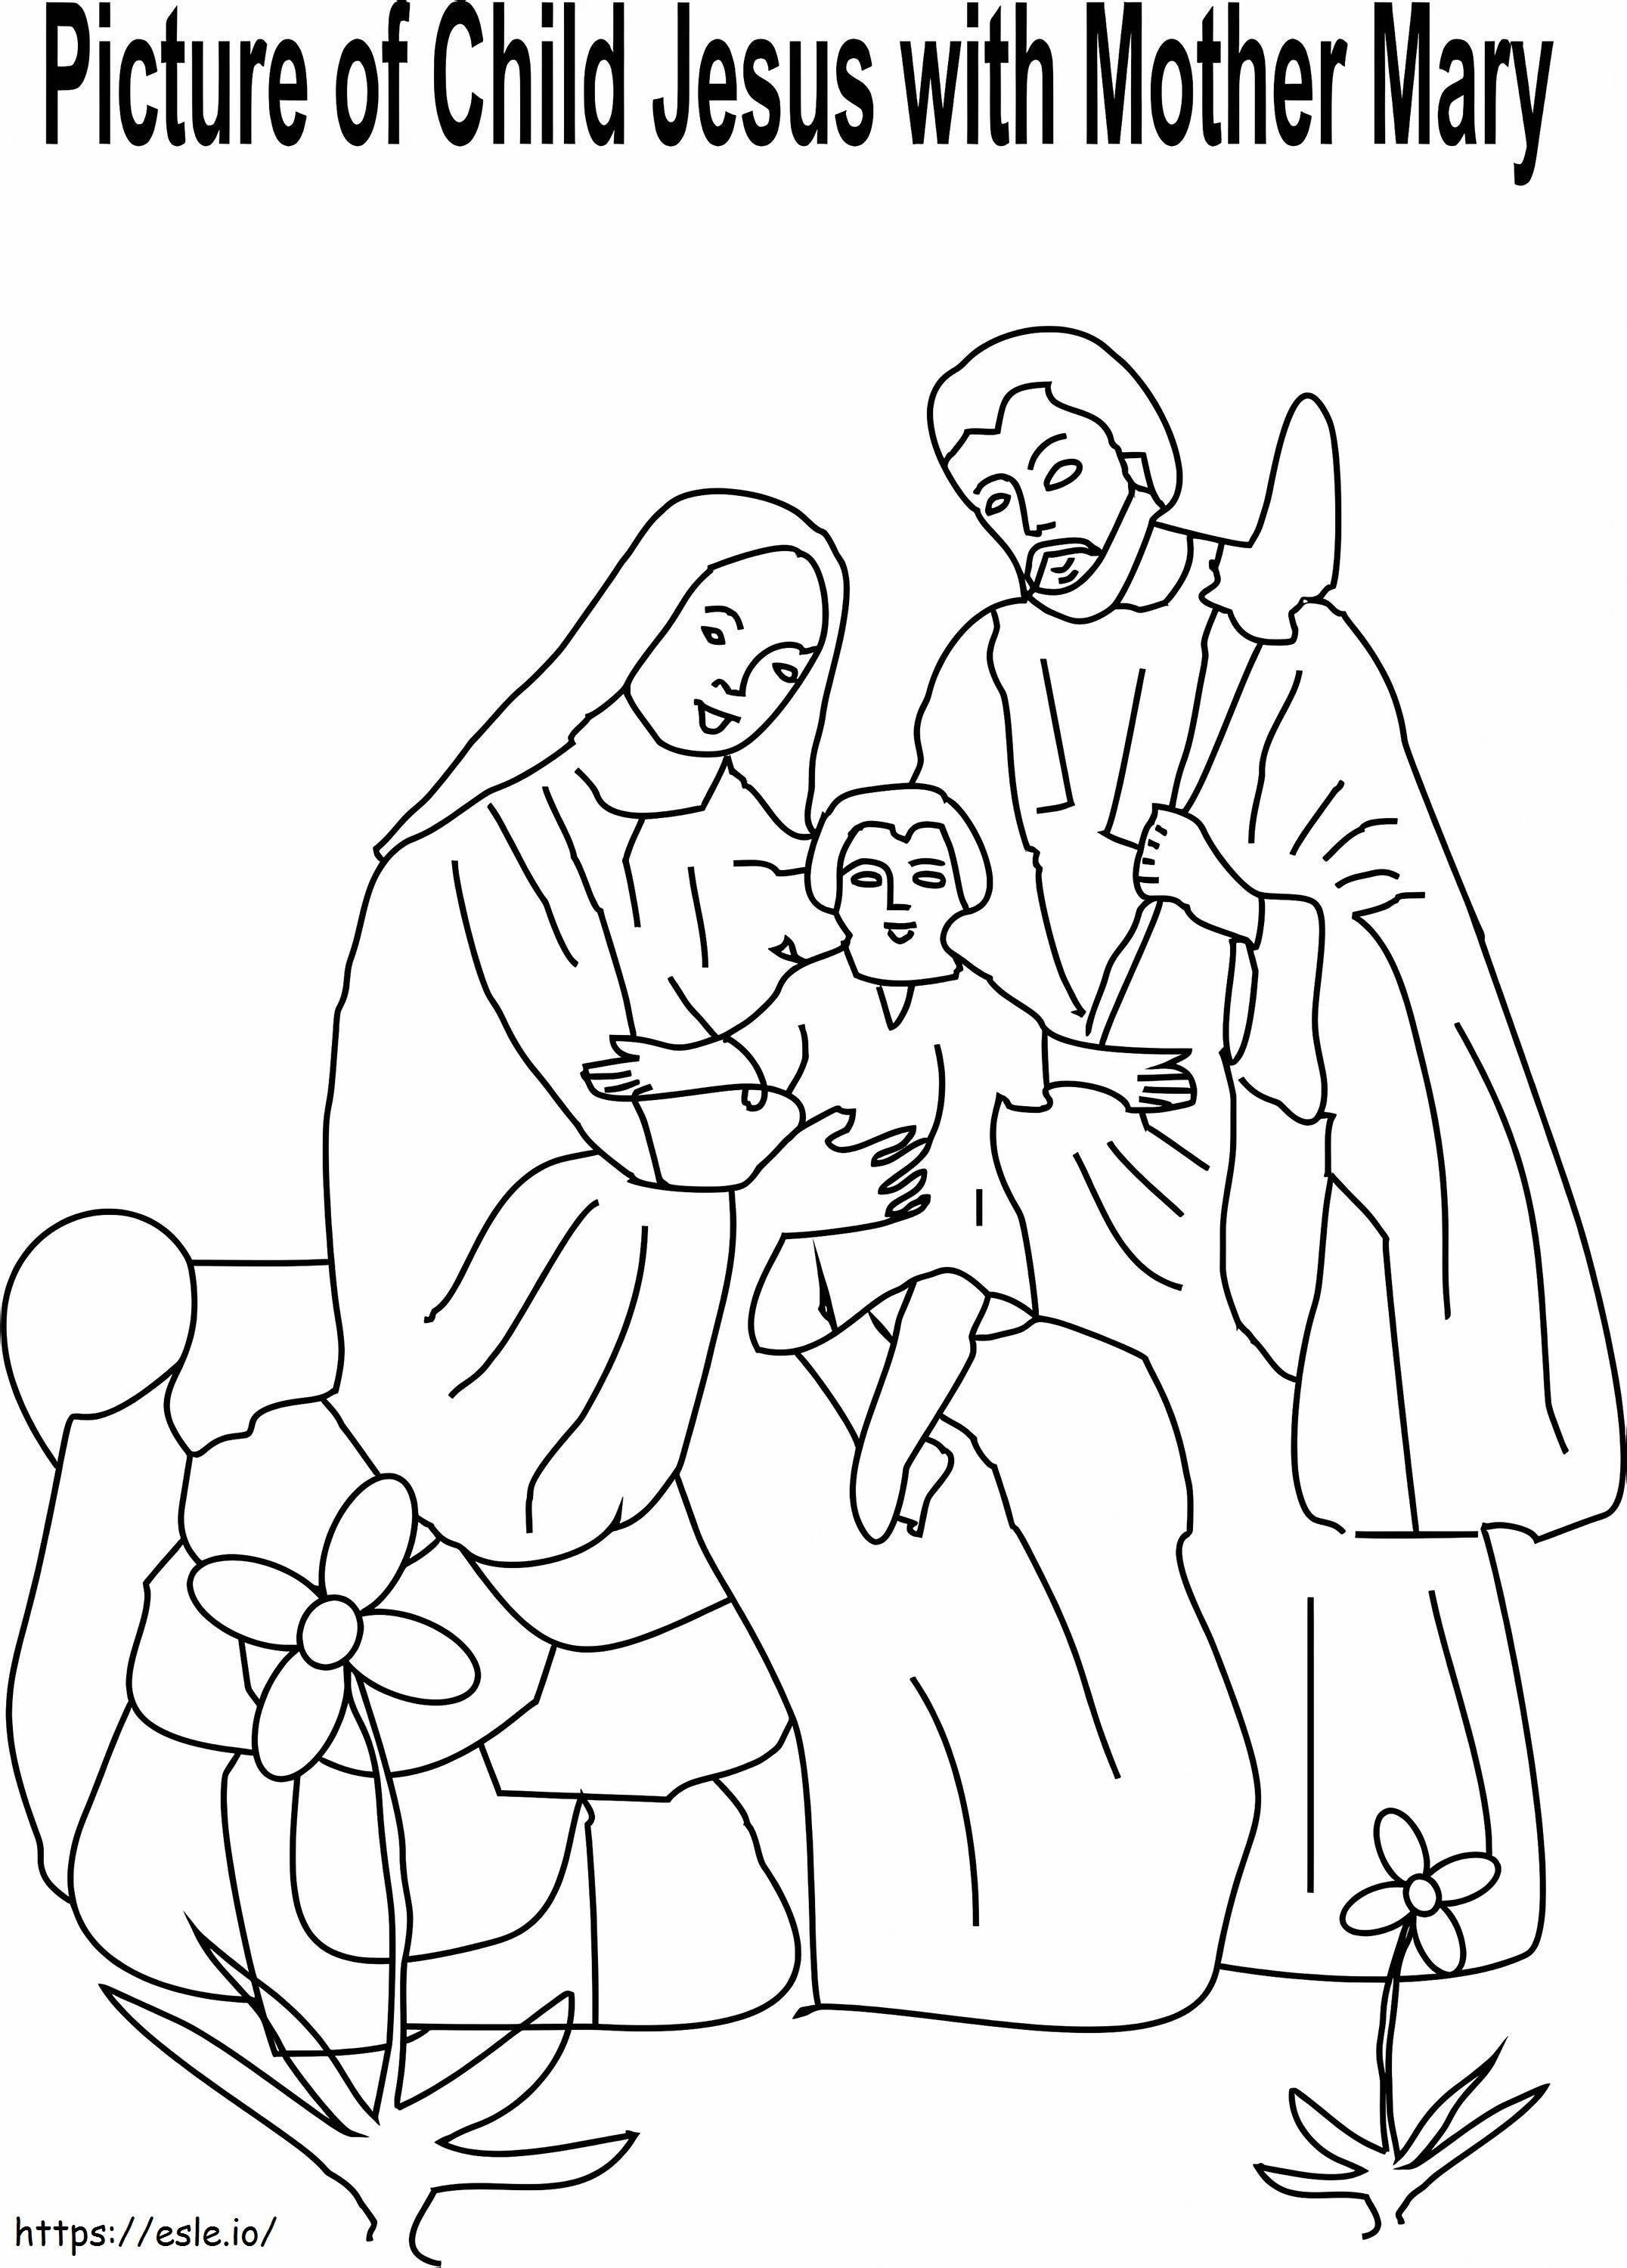 Mother Mary coloring page